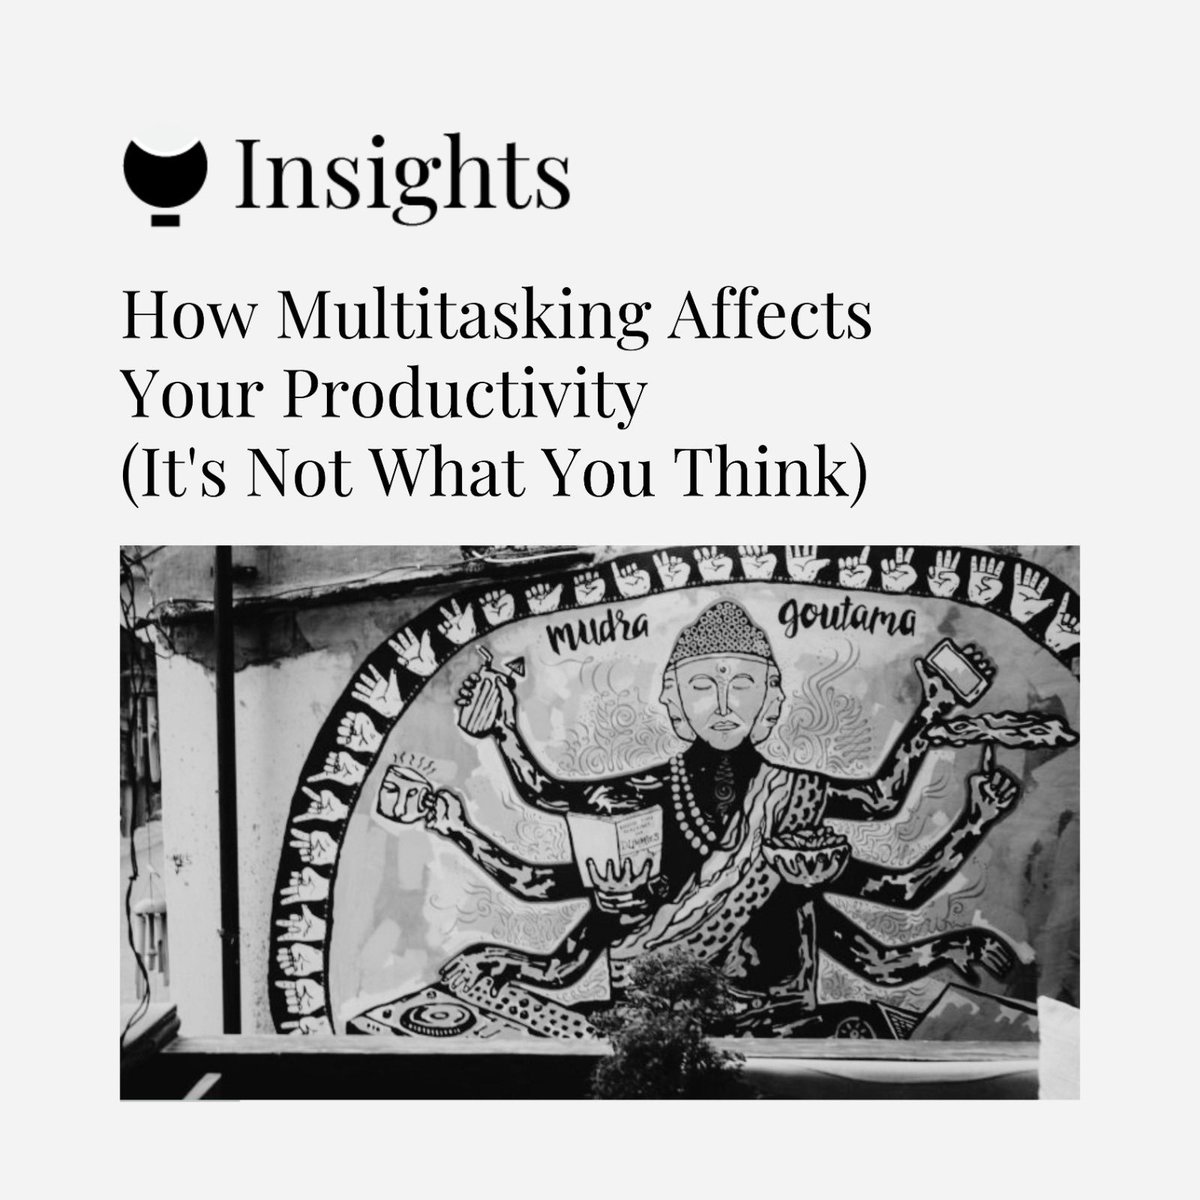 Multitasking seems like a great idea when tackling your to-do lists, but in fact, it’s ruining your productivity. 

Continue reading at lnkd.in/eirQ8GhN 

#LMSL #InsightsMagazine #HouseholdEquality #FairTaskDistribution #RelationshipSatisfaction #Productivity #multitasking